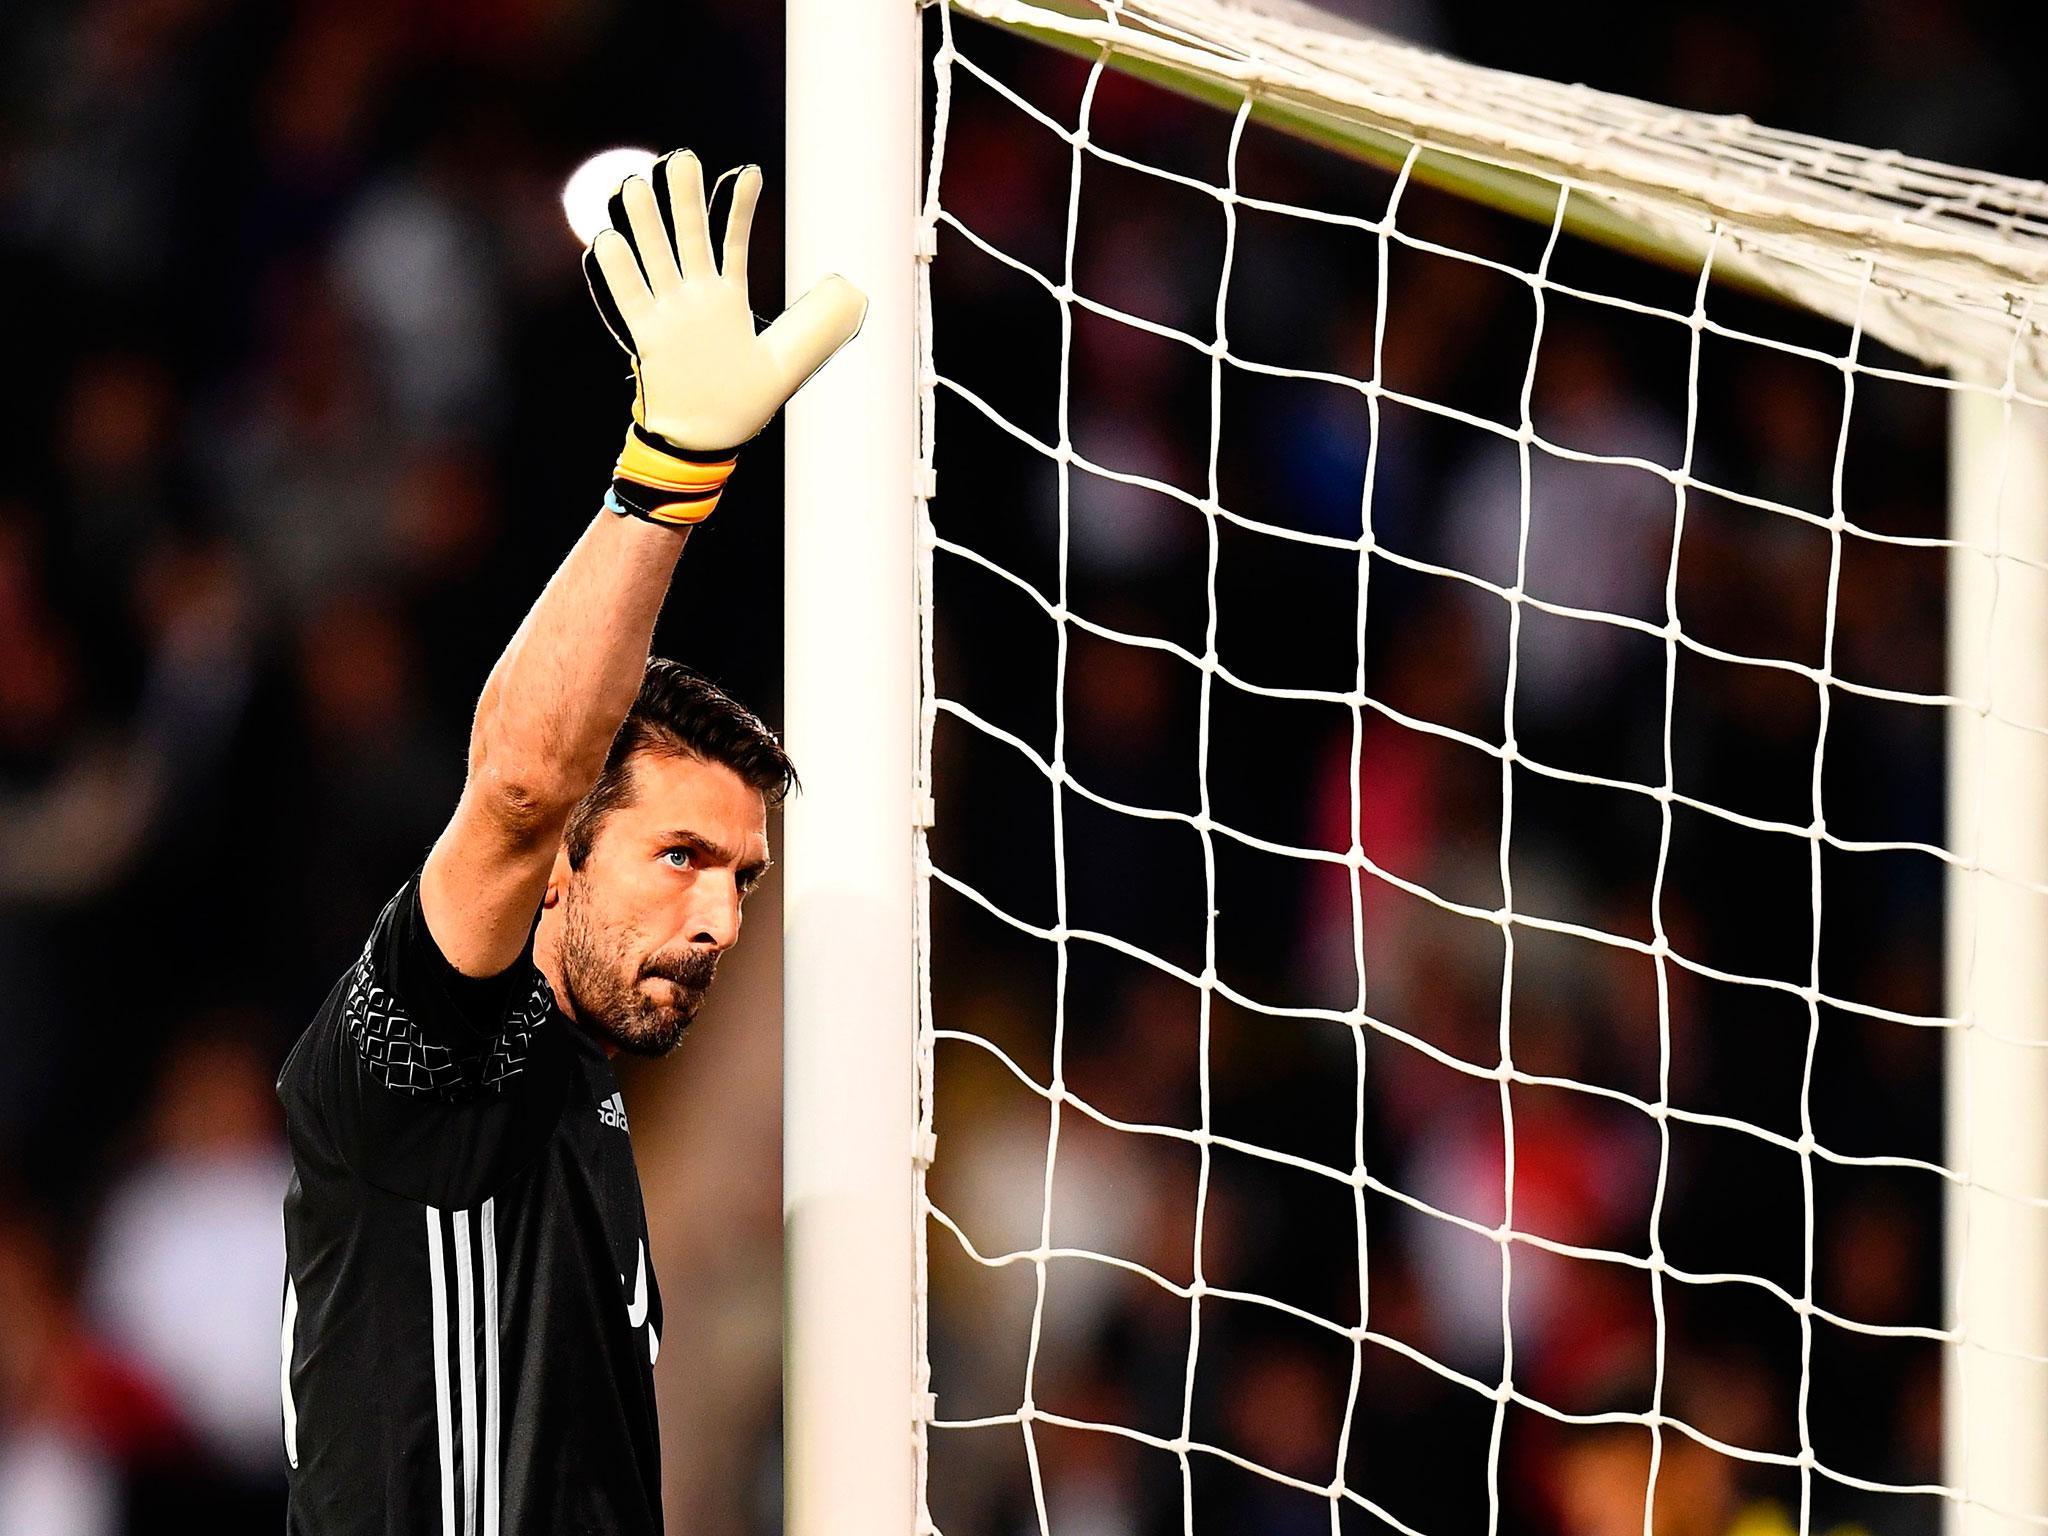 Gianluigi Buffon continues to perform at the very highest level